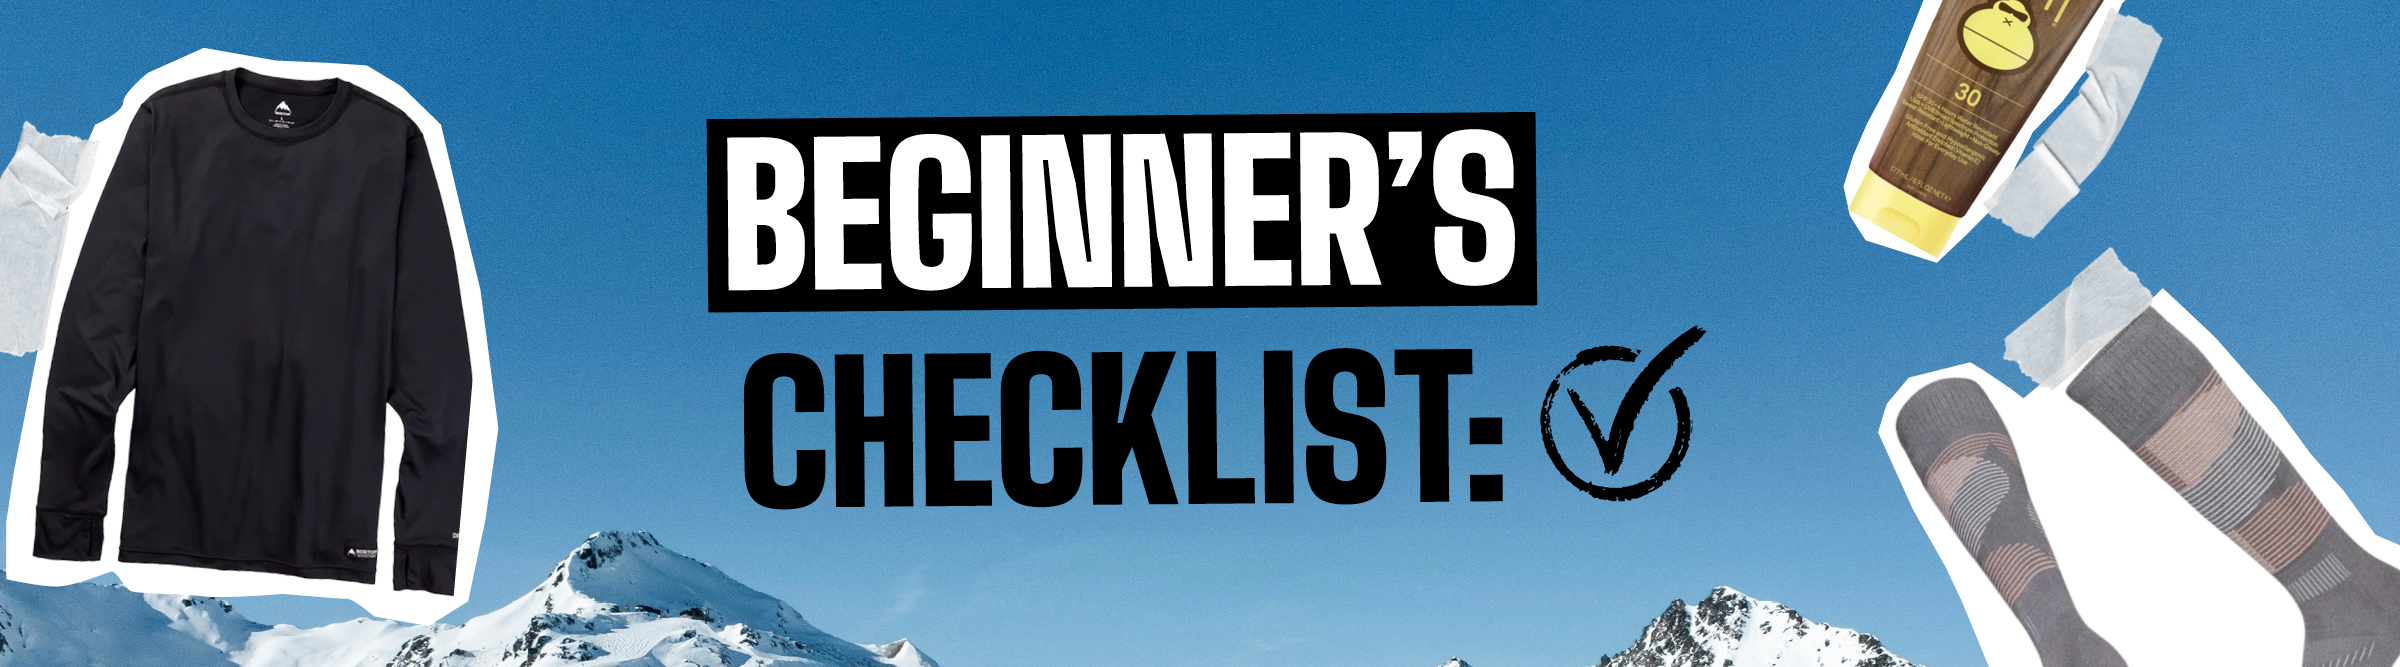 Top 10 Beginner Essentials for Snowboarding and Snow Skiing